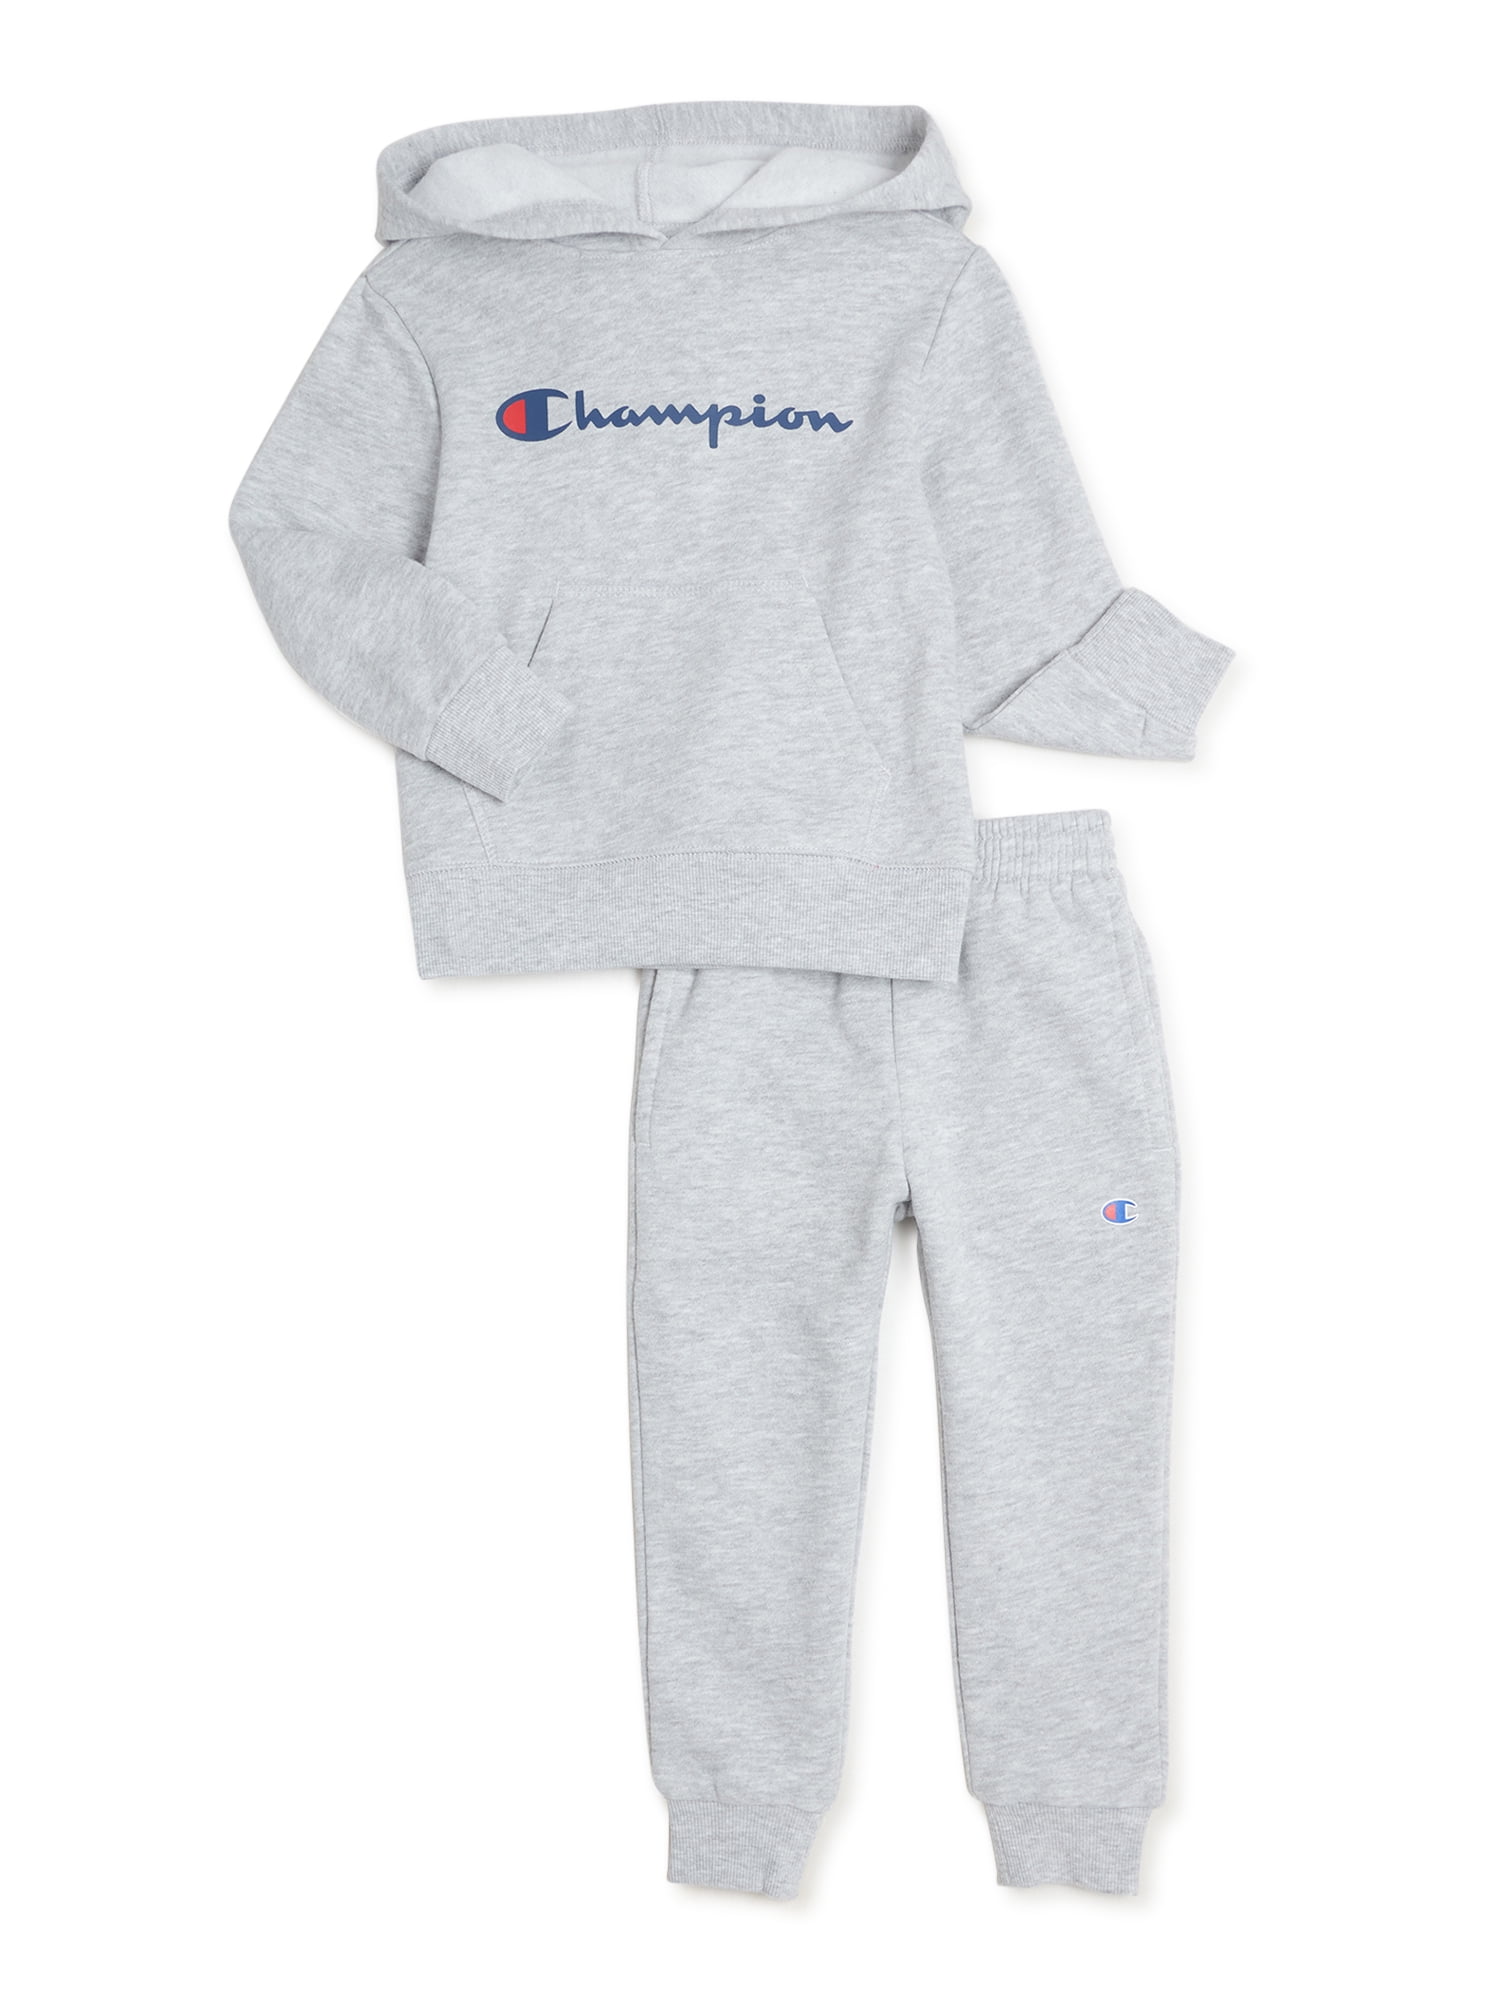 Champion Toddler Boys\' Matching Hoodie and Jogger Set, 2-Piece, Size 2T-4T